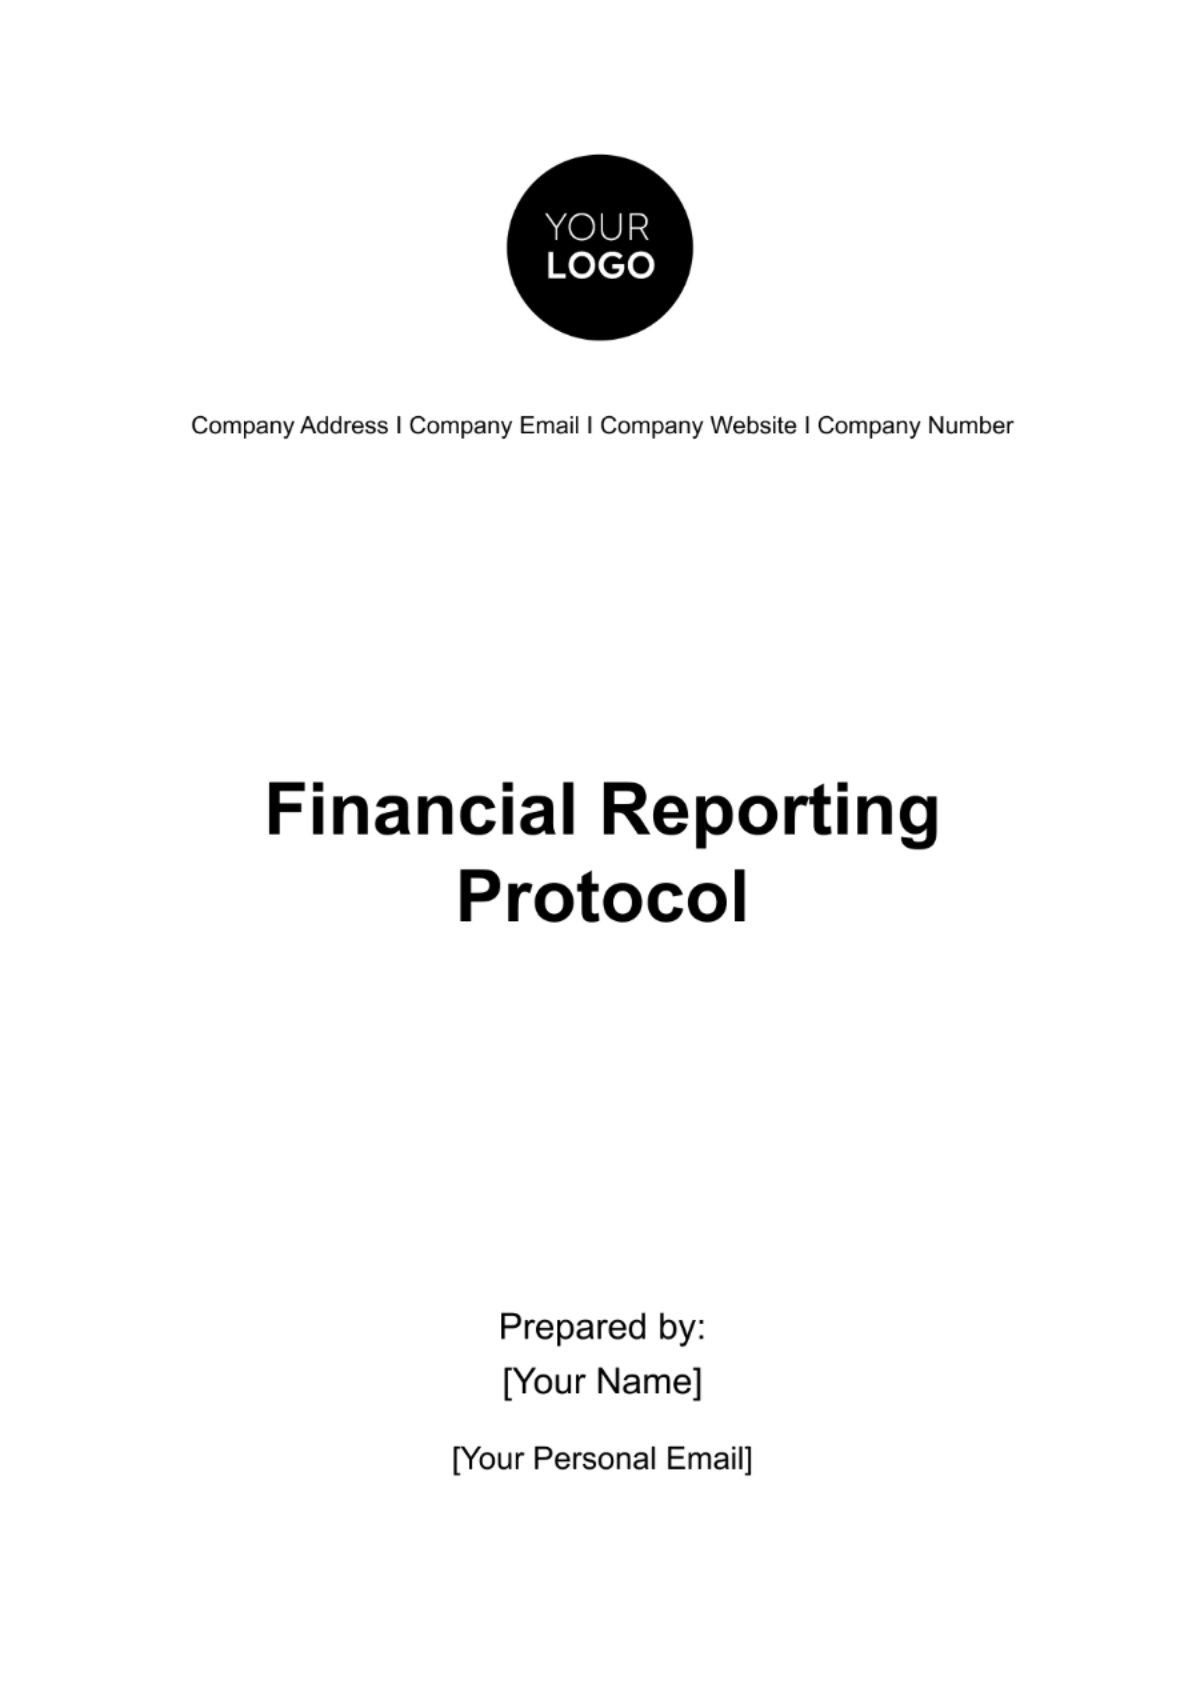 Financial Reporting Protocol Template